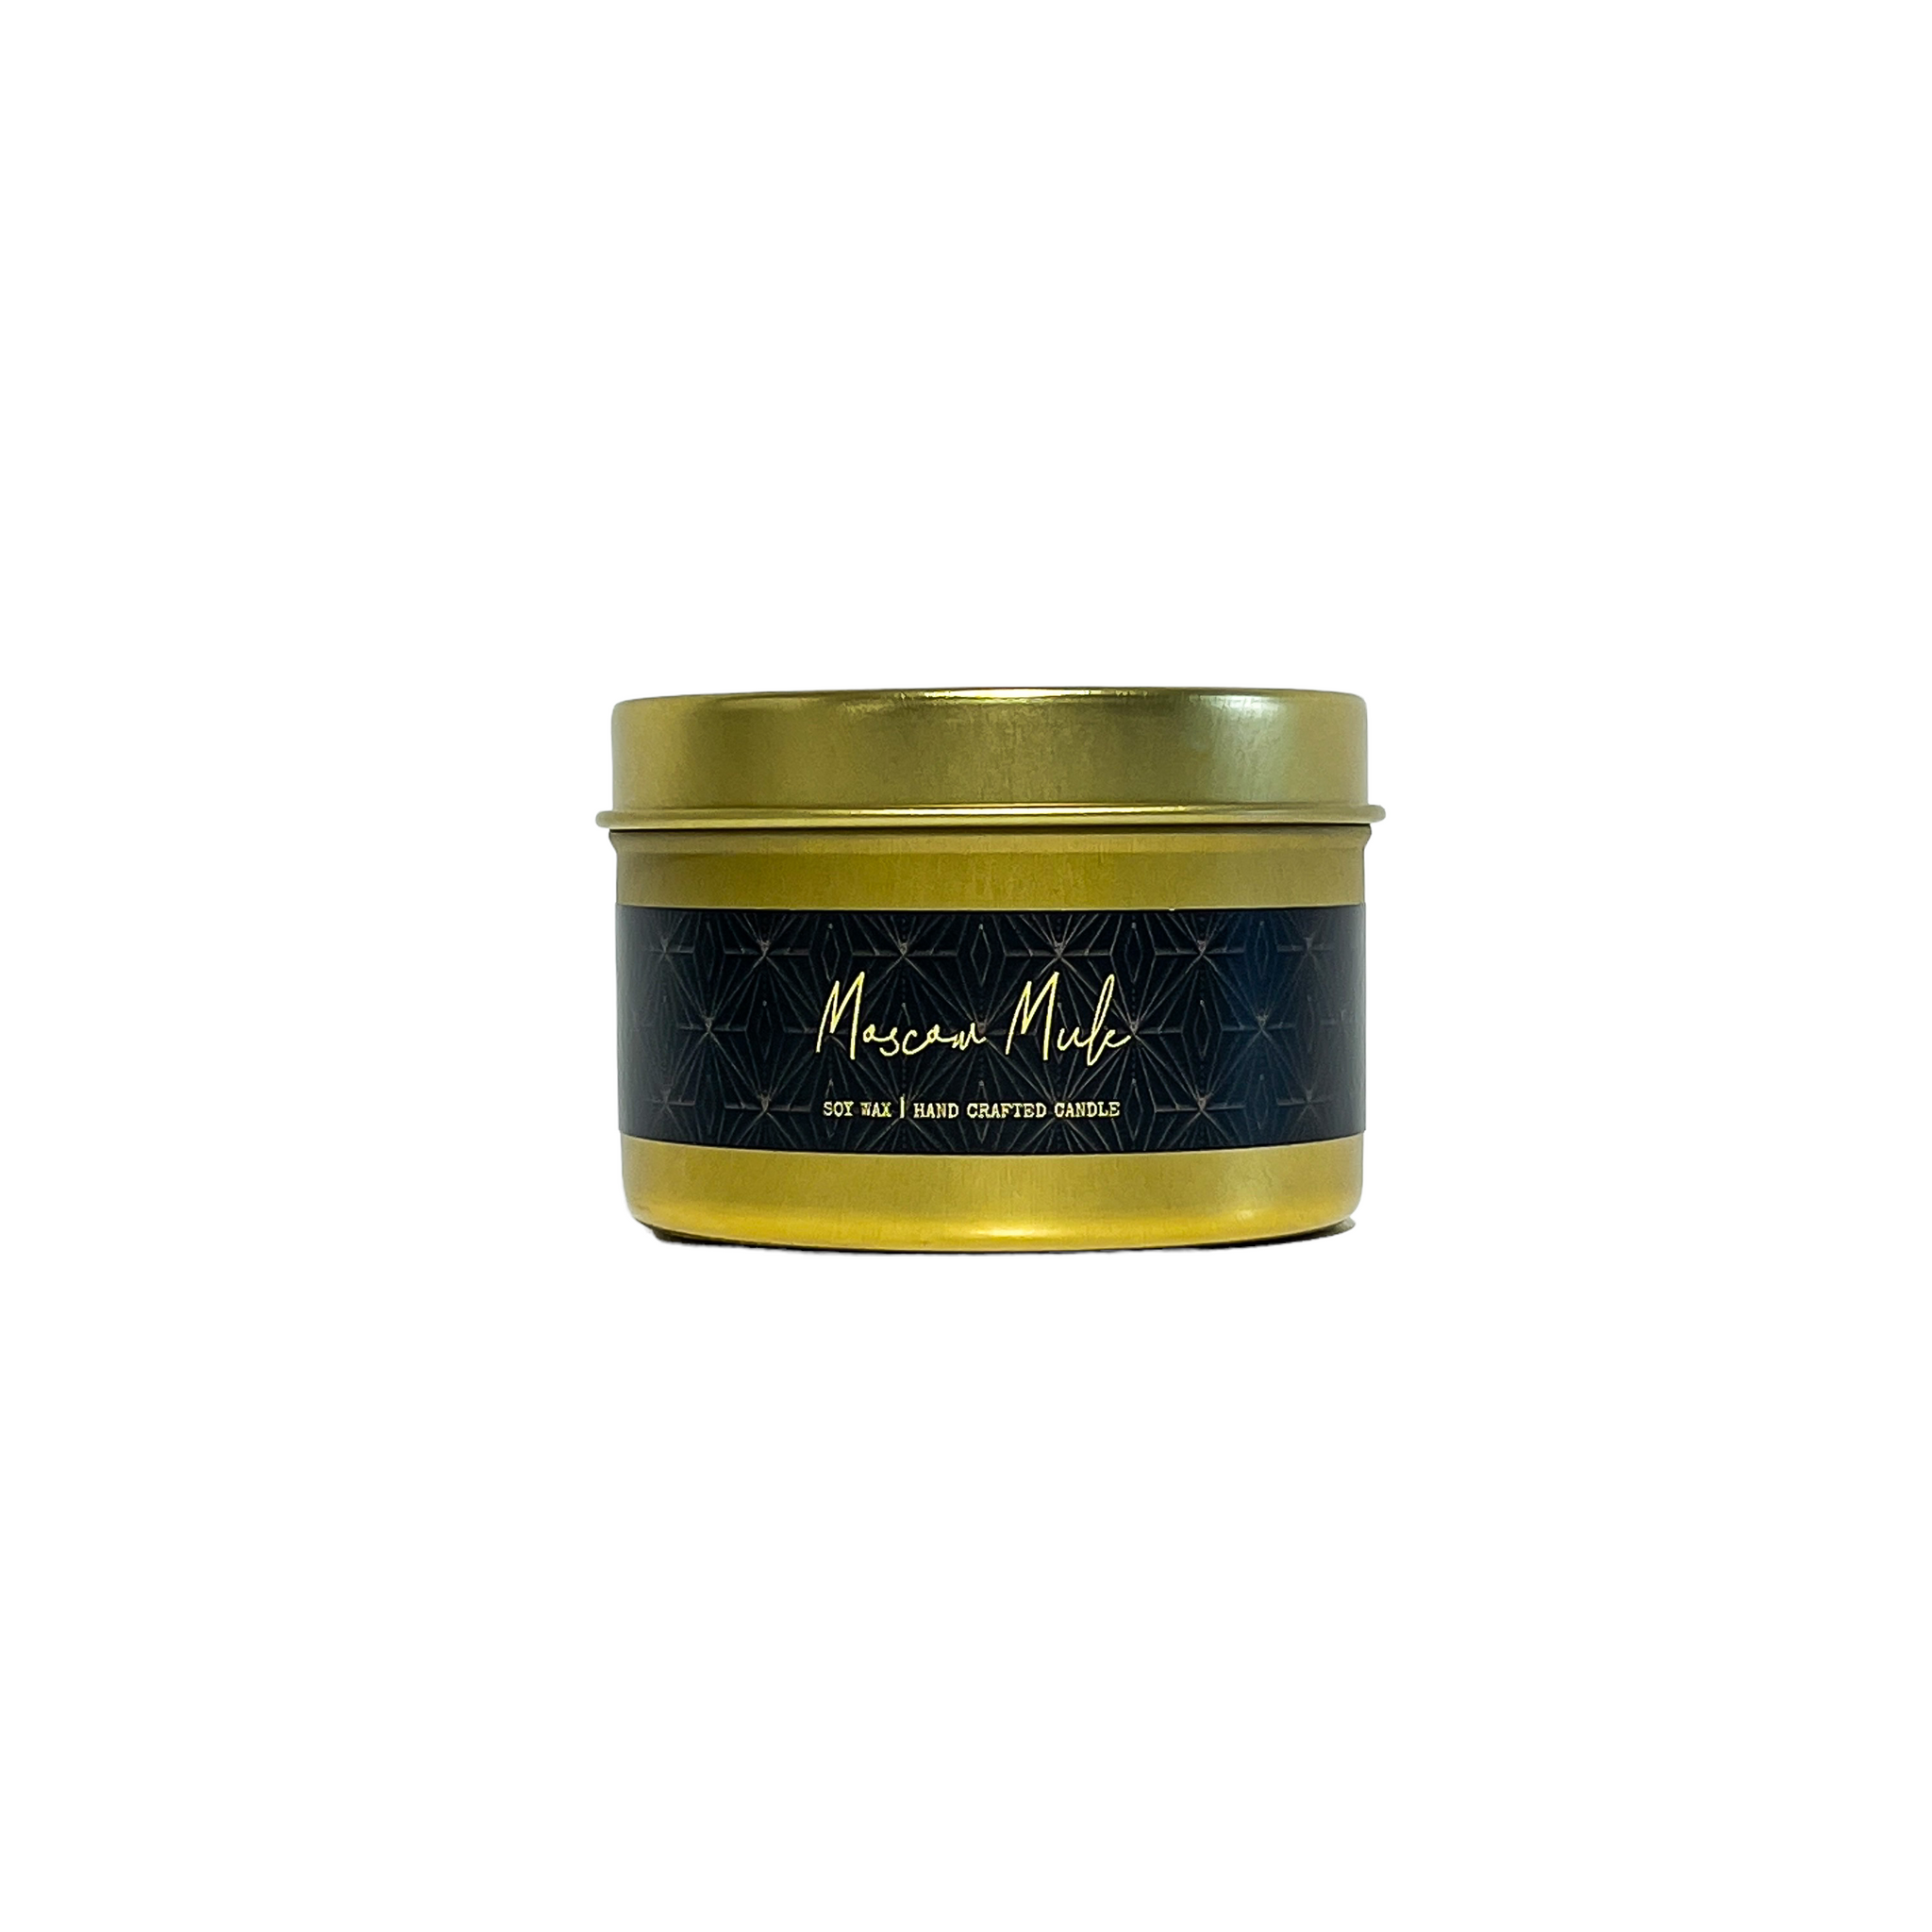 Gold, four ounce tin, soy wax candle with black label that reads Moscow Mule